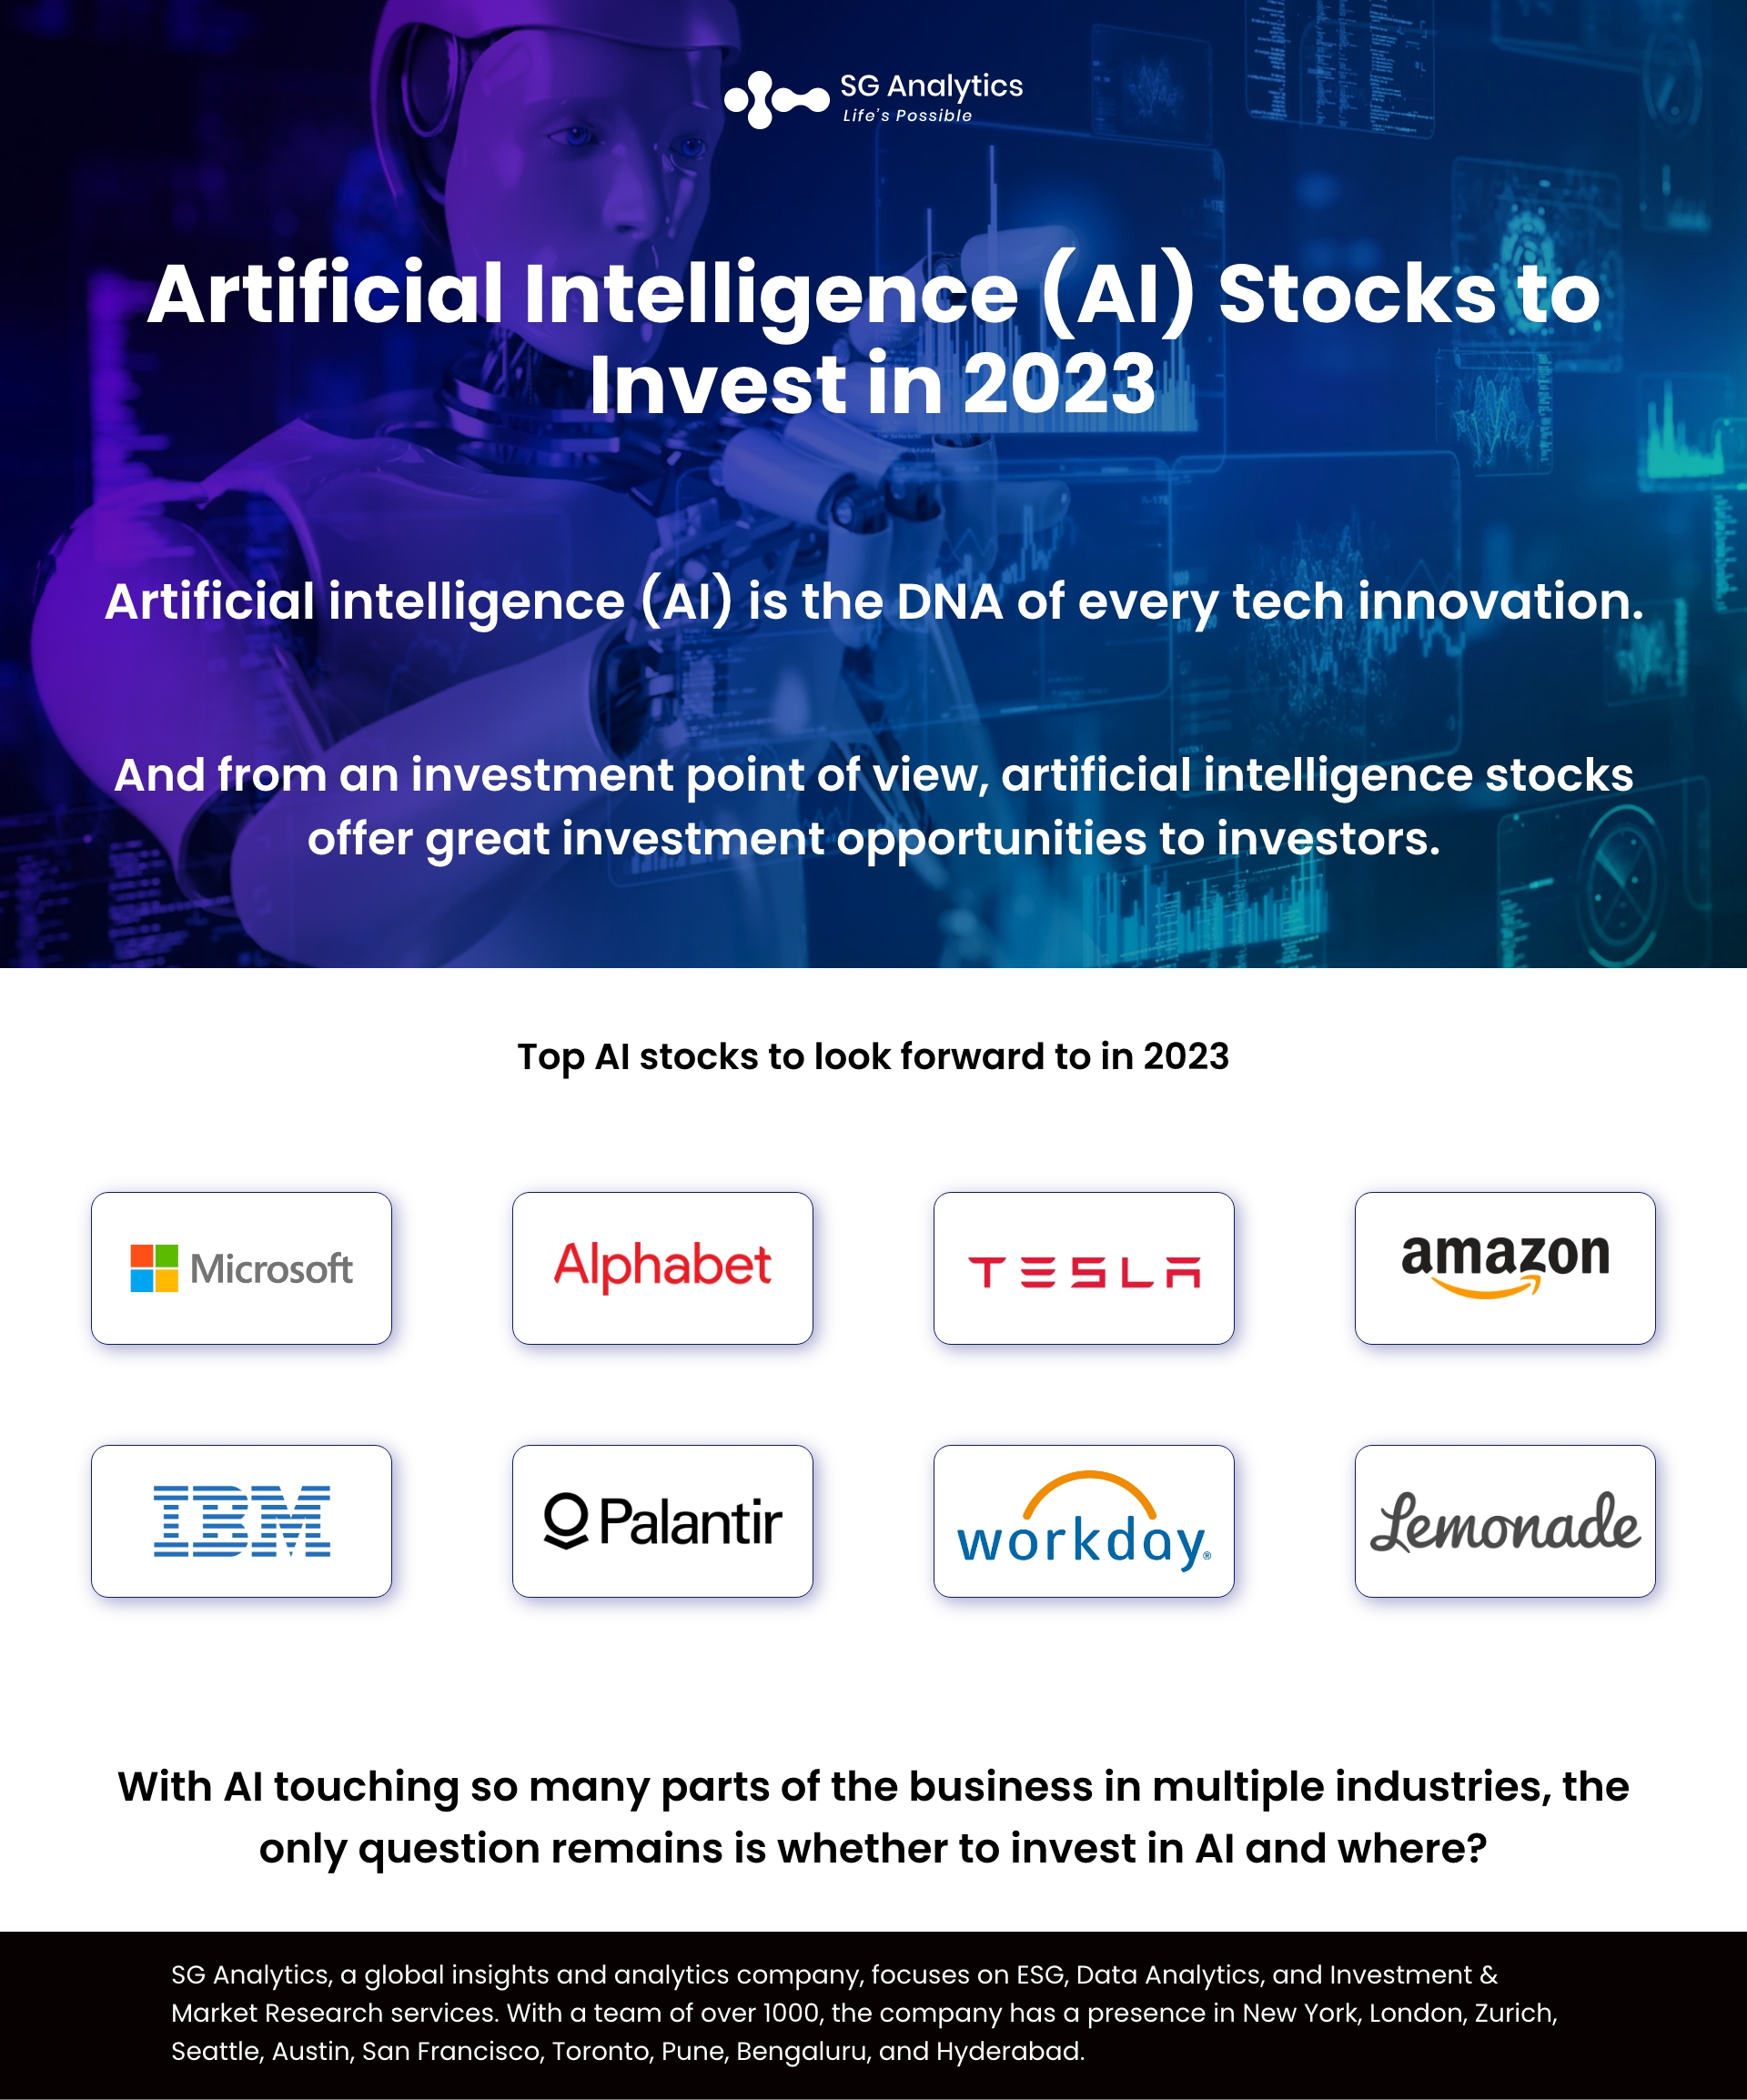 Artificial Intelligence (AI) Stocks to Buy in 2023